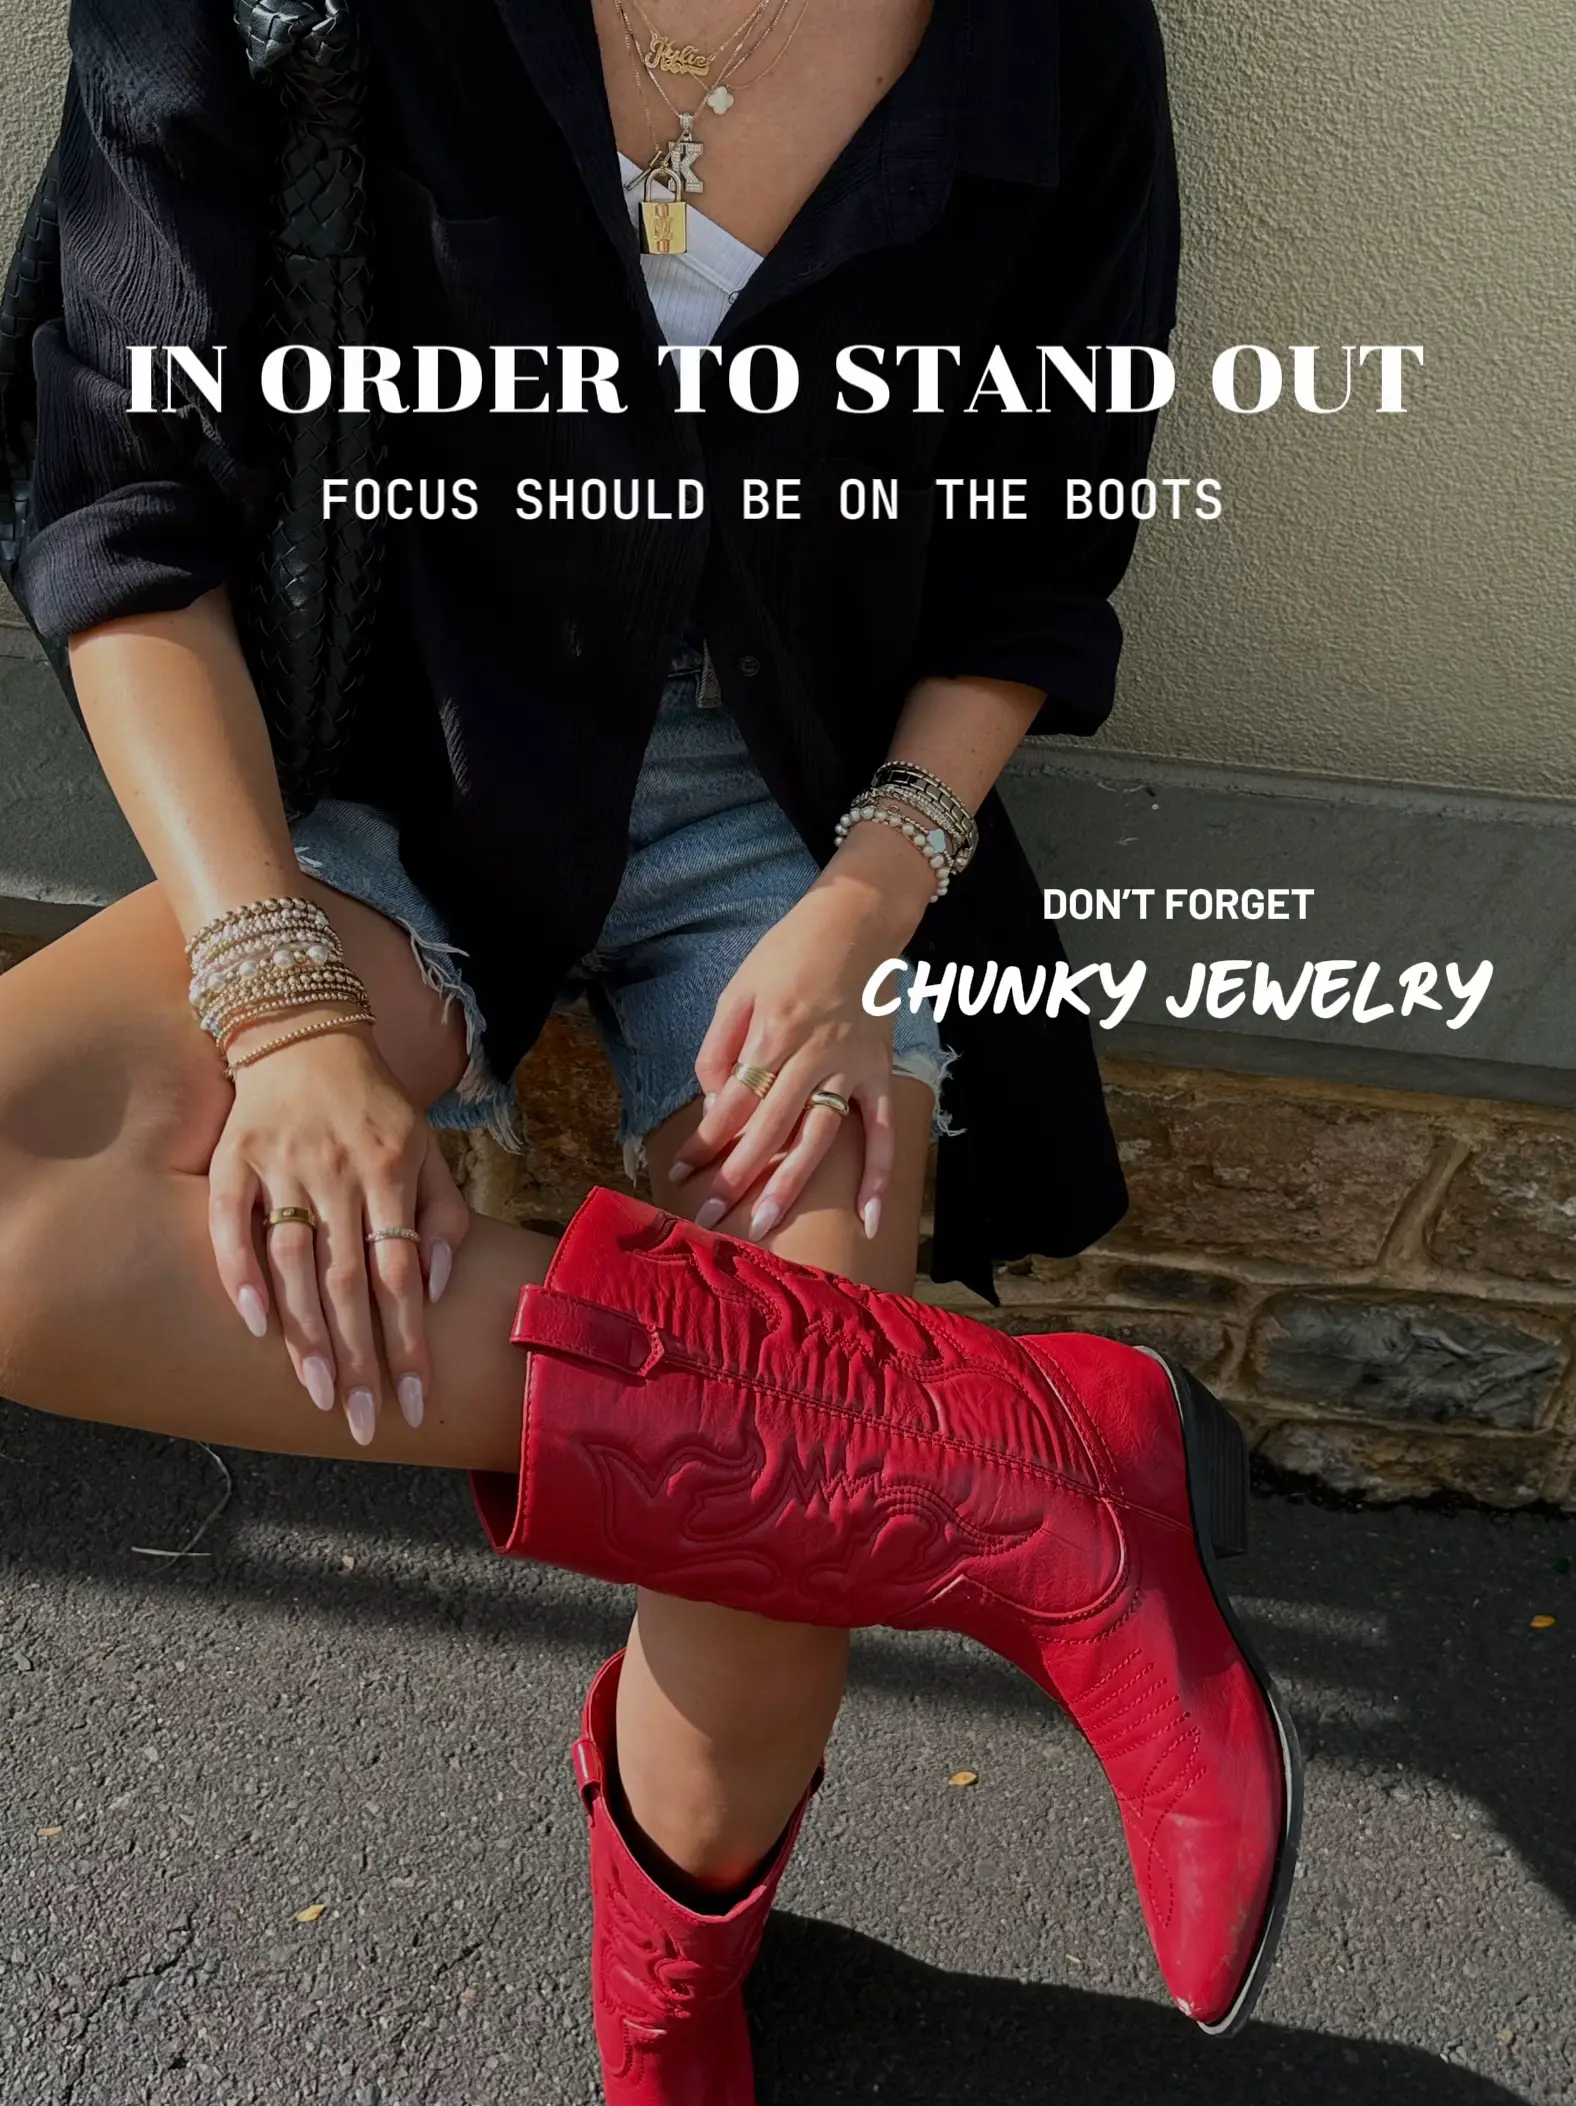 Styling red cowboy boots, Gallery posted by Kylie Boyd